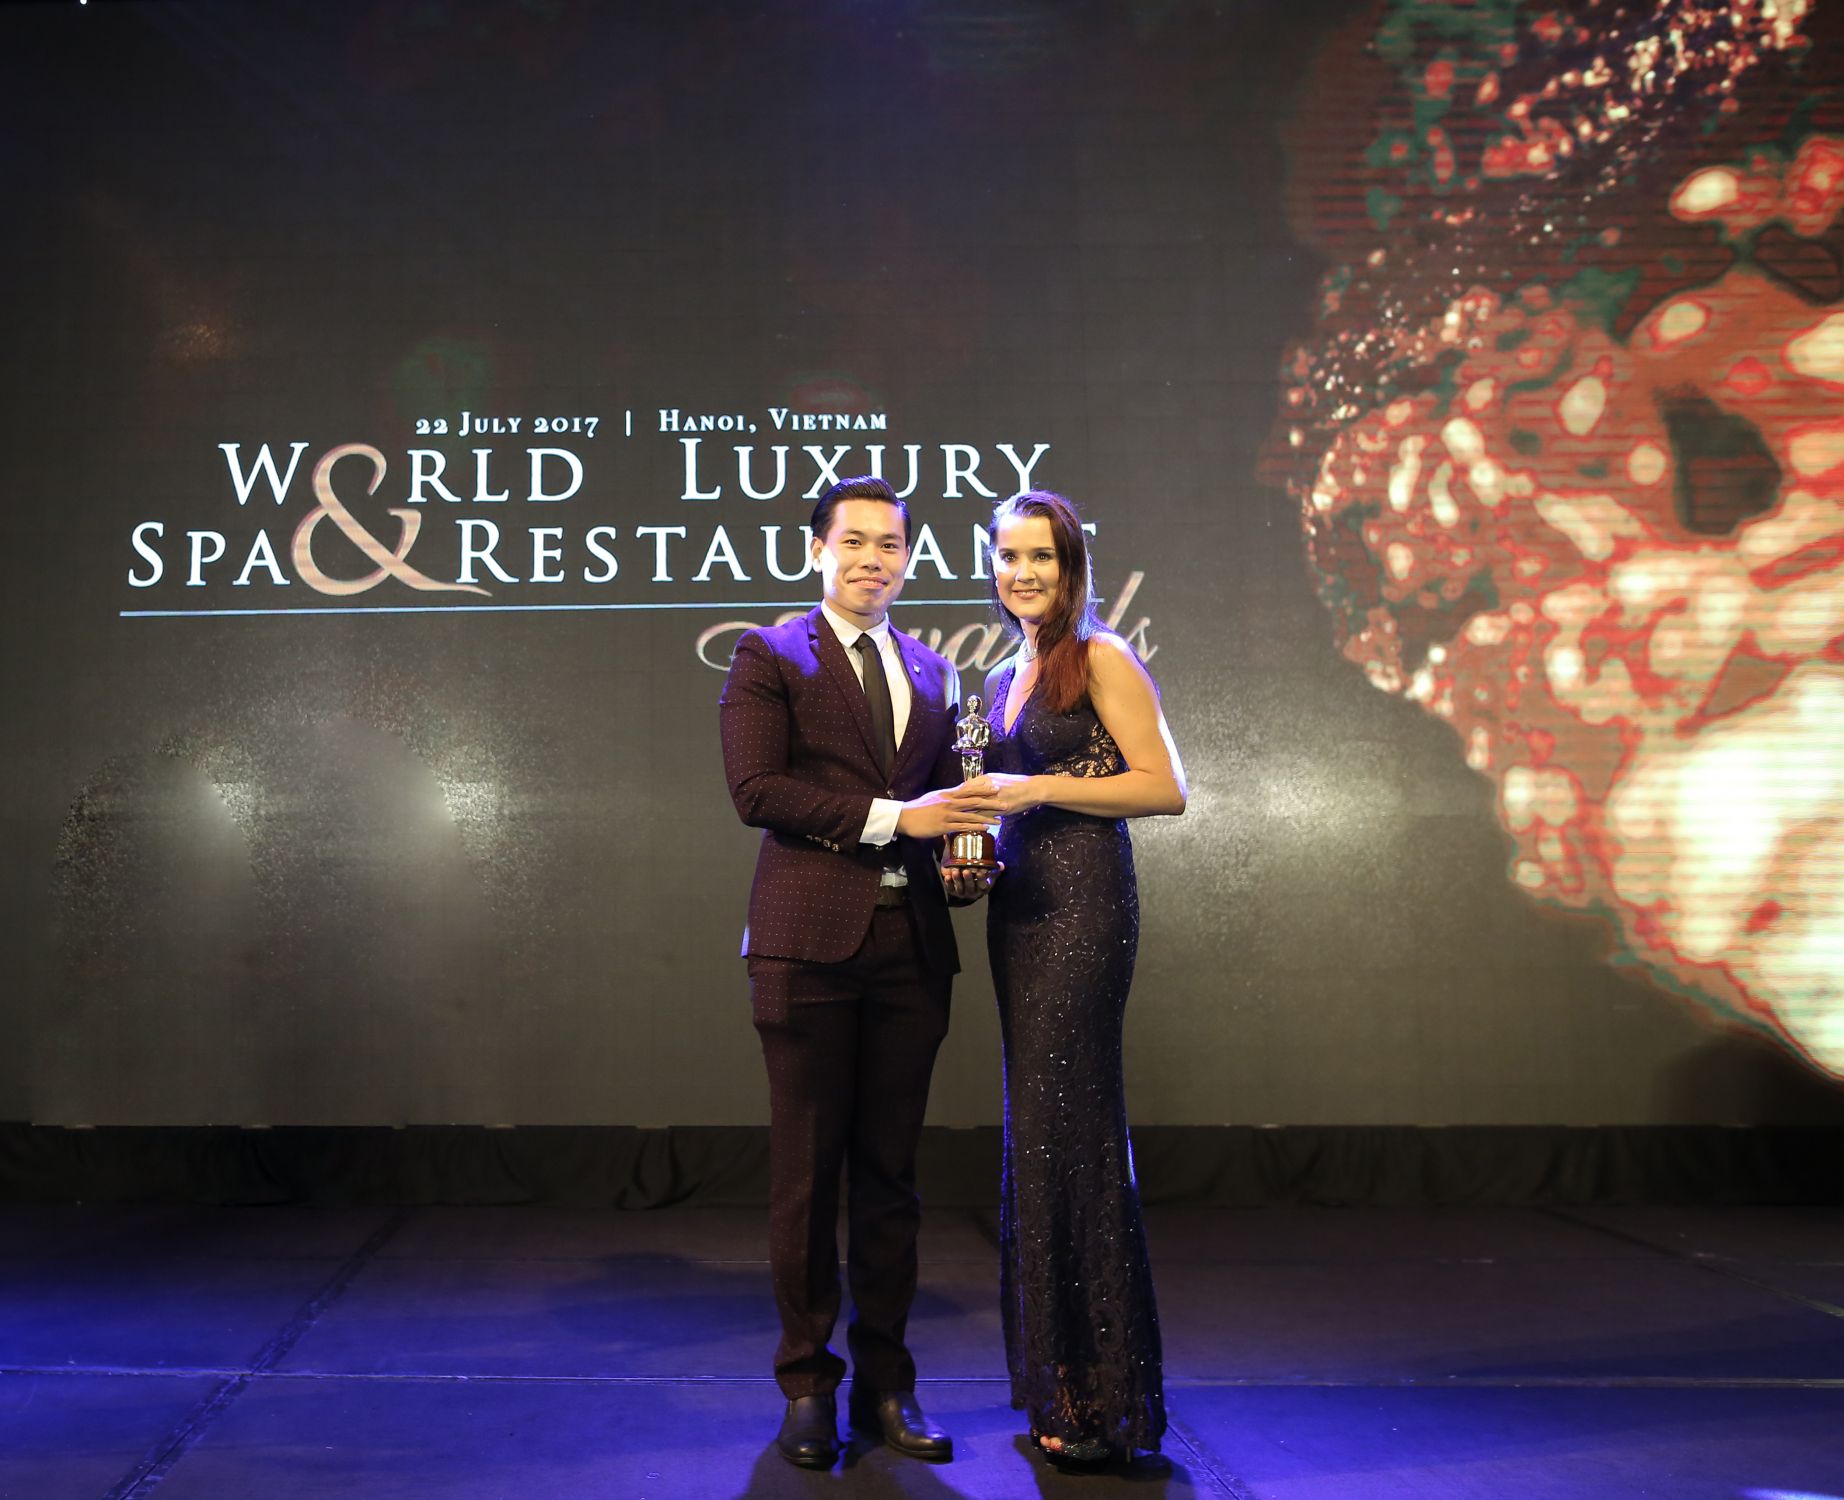 Mr. Vu Duc Linh  French Grill Assistant Restaurant Manager honored to receive the award